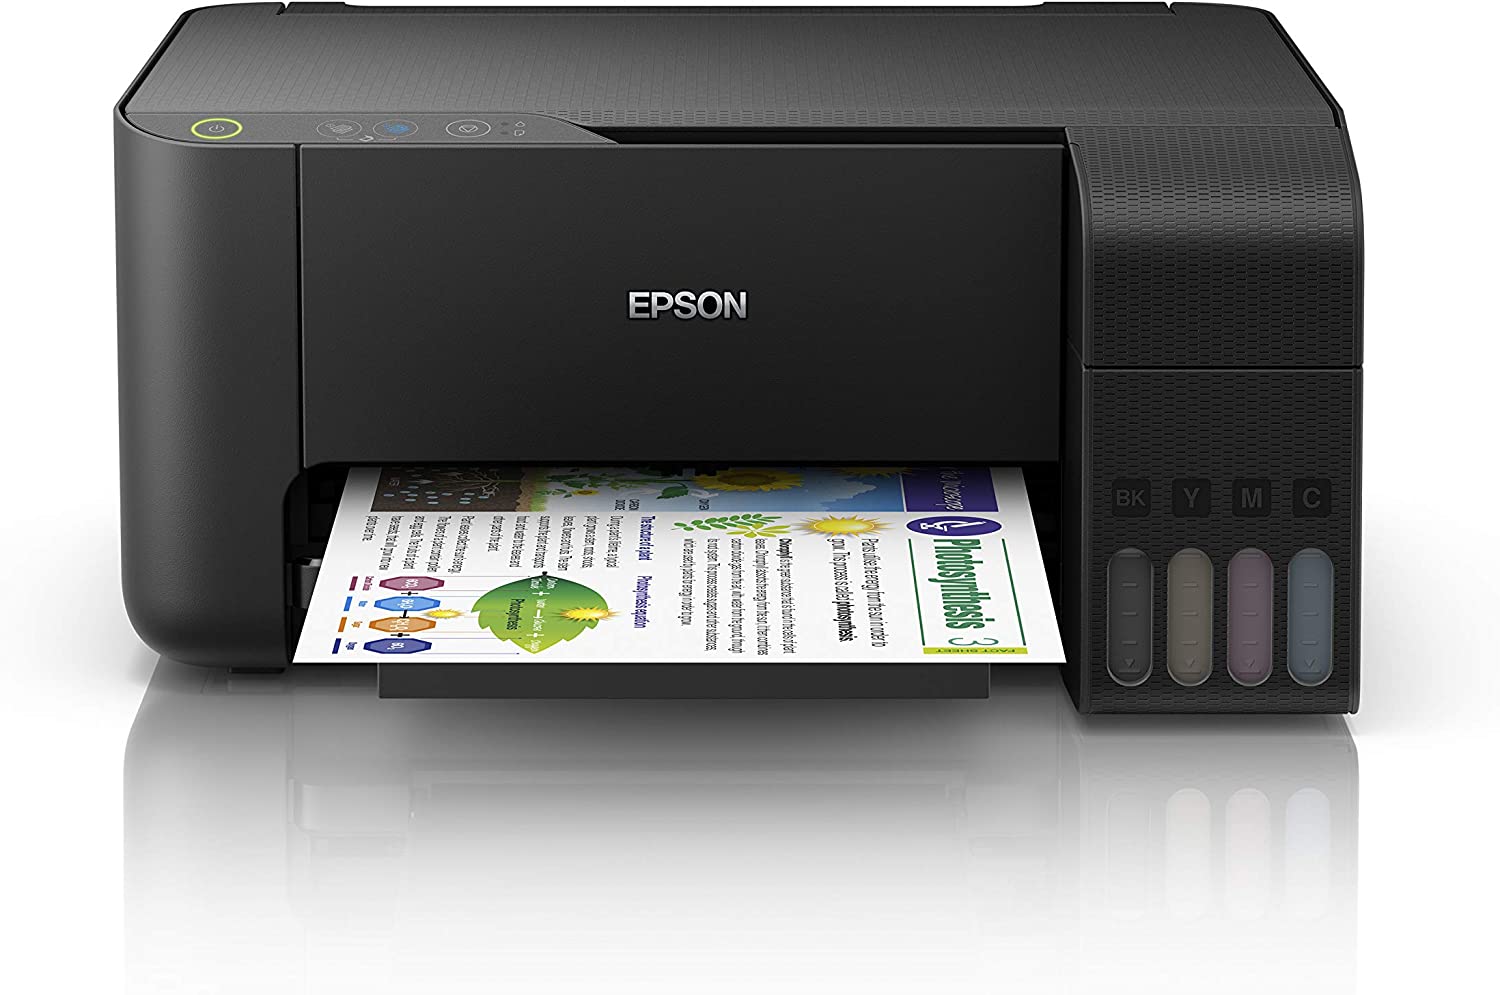 EPSON EcoTank L3110 All in One